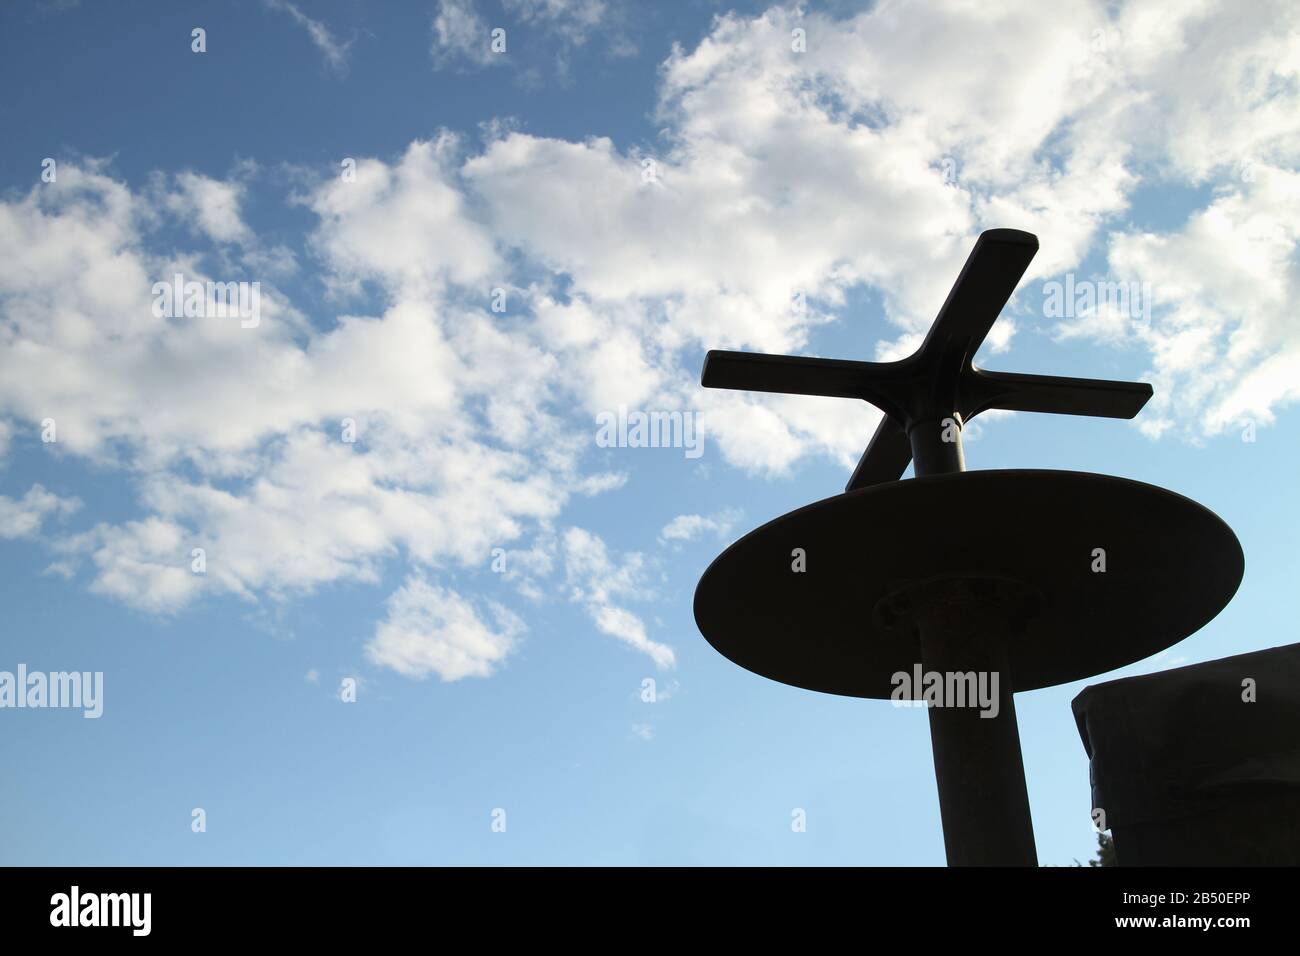 Silhouette of a NATO military mobile radar antenna against a blue sky and white clouds, concept of harmful effects of electromagnetic radiation Stock Photo